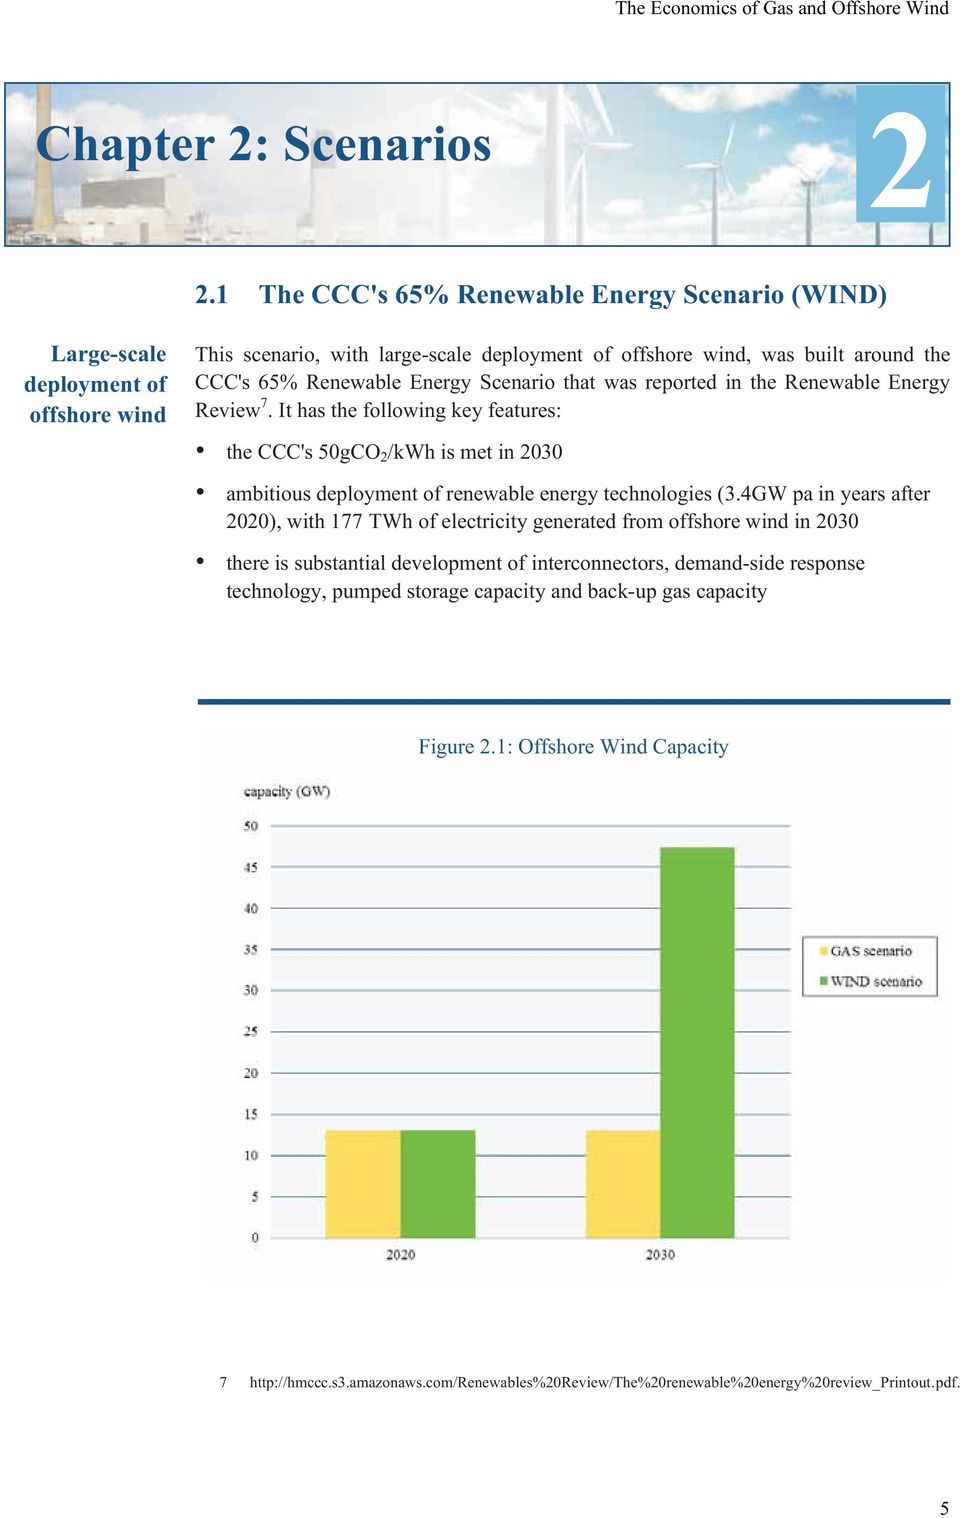 Energy Scenario that was reported in the Renewable Energy Review 7.